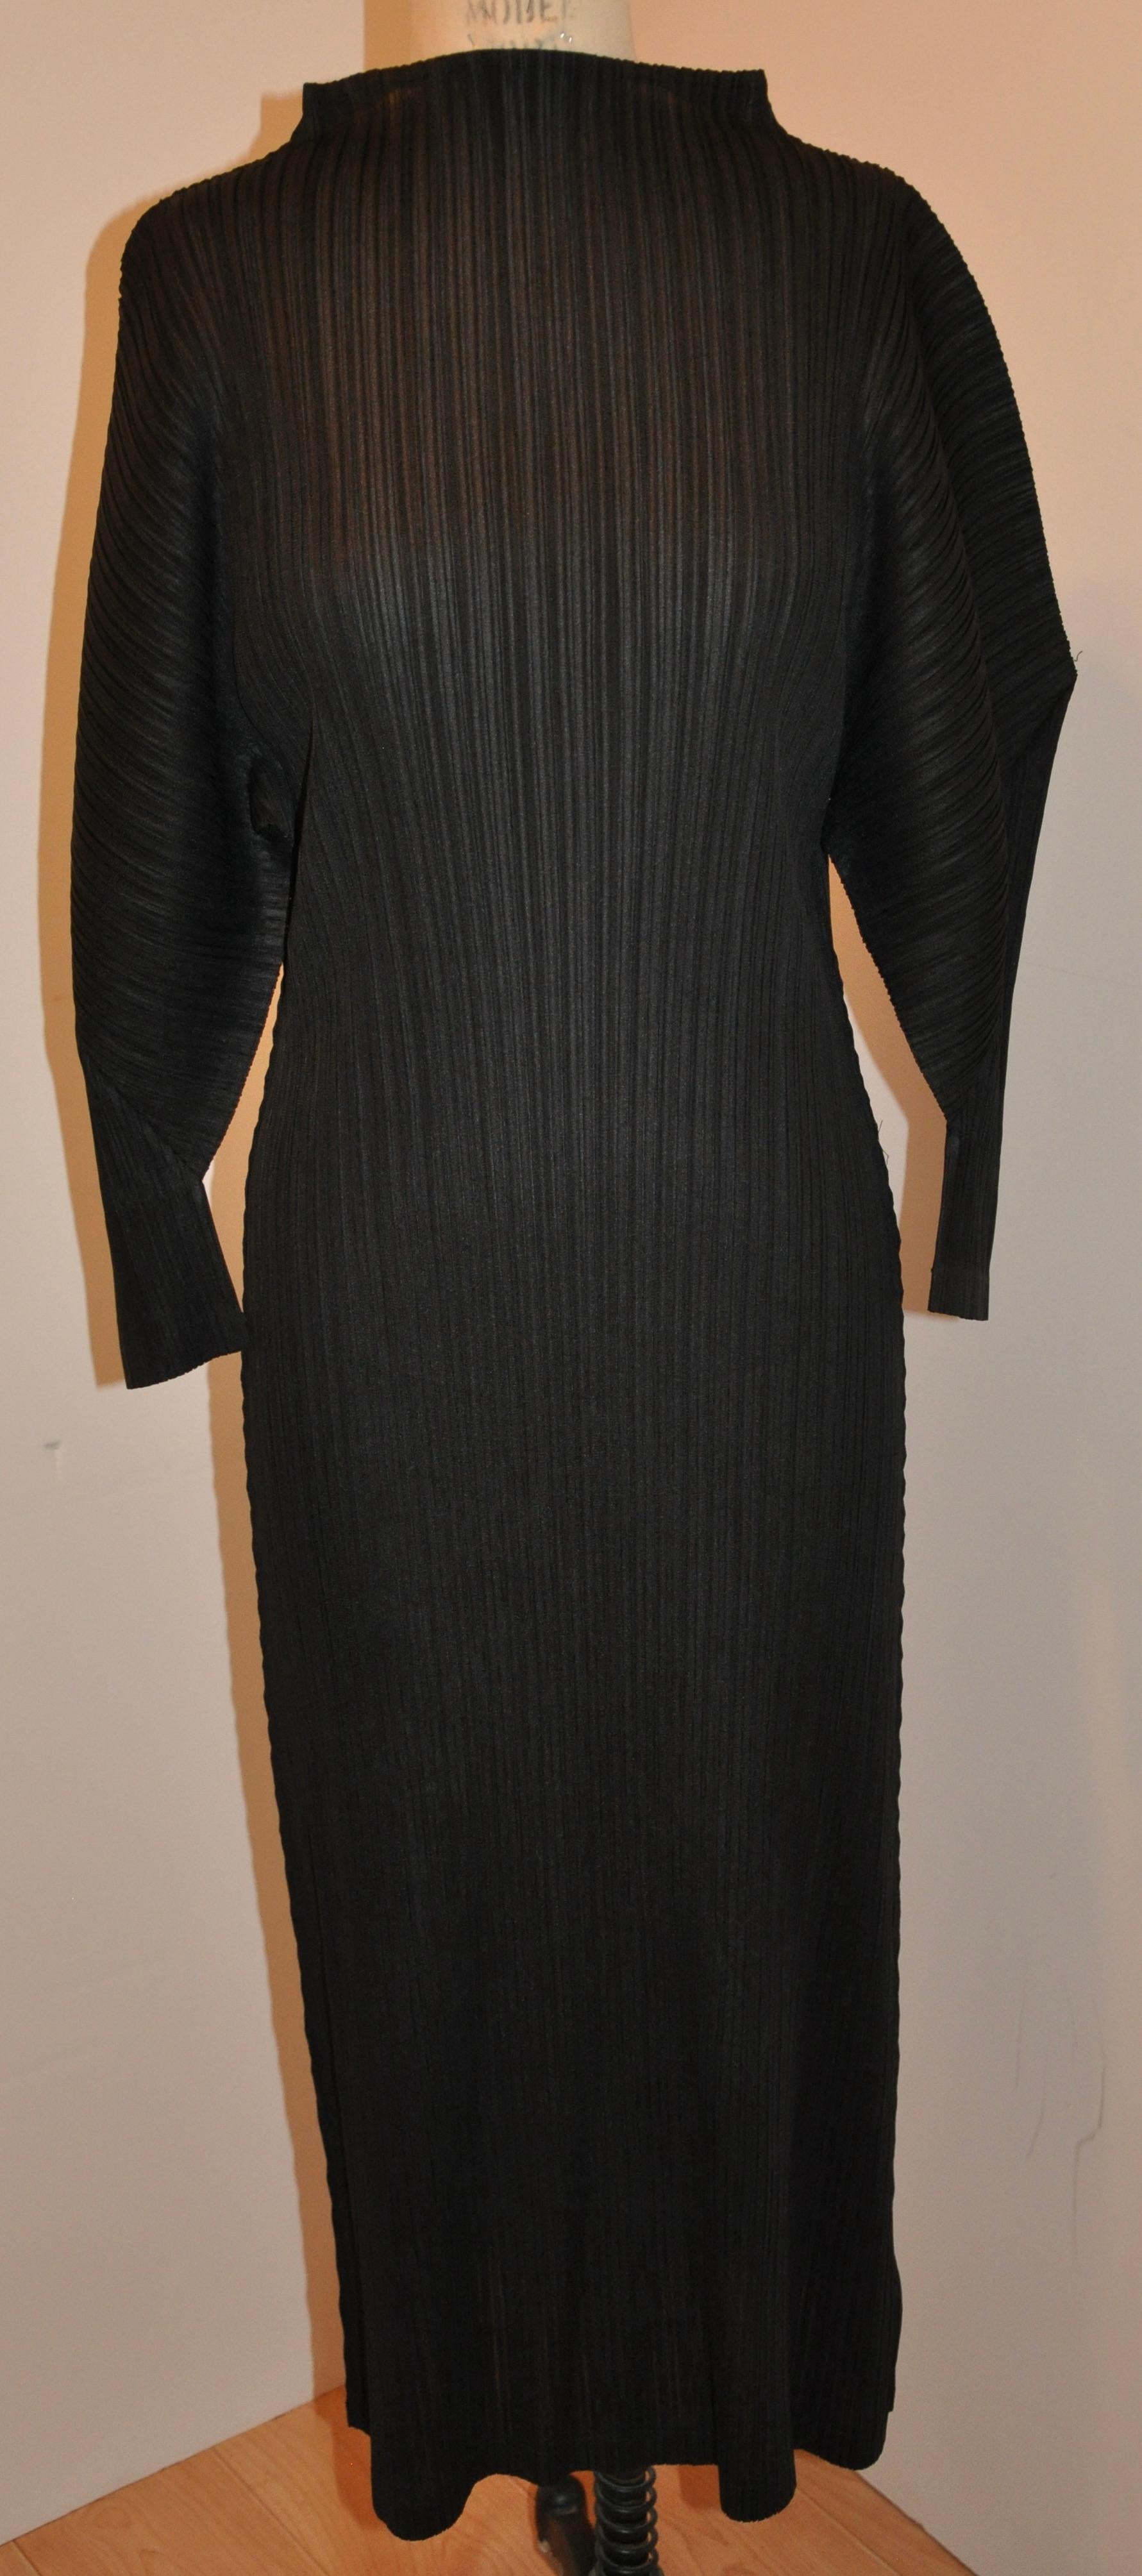      Issey Miyake iconic signature jet-black high-neck , slightly flared pullover dress measures 47 1/2 inches in length. Neckline circumference is 18 inches, shoulders are 25 inches across, sleeves are 13 inches in length, cuffs are 8 inches,